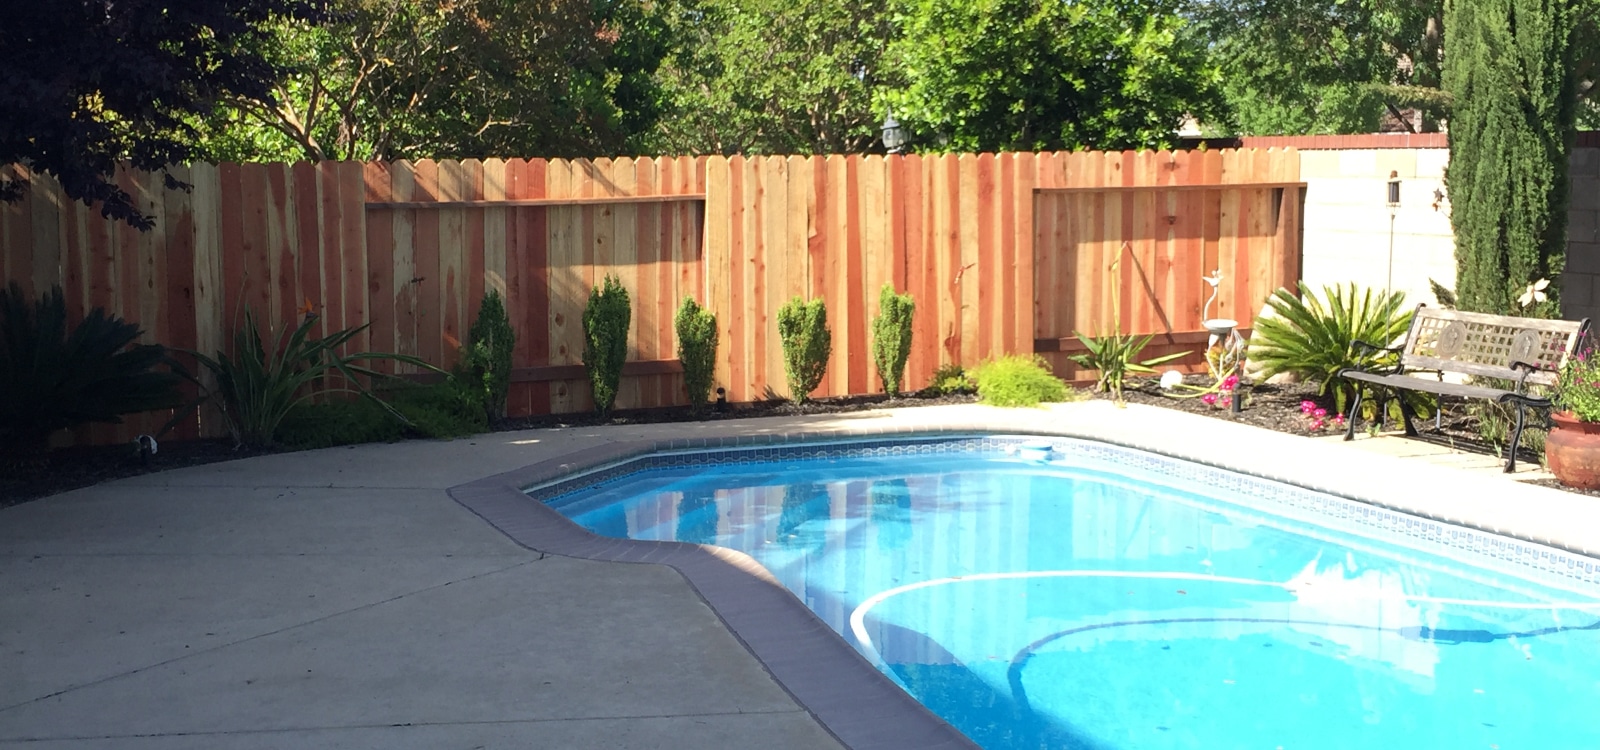 Installing A Fence For A Pool